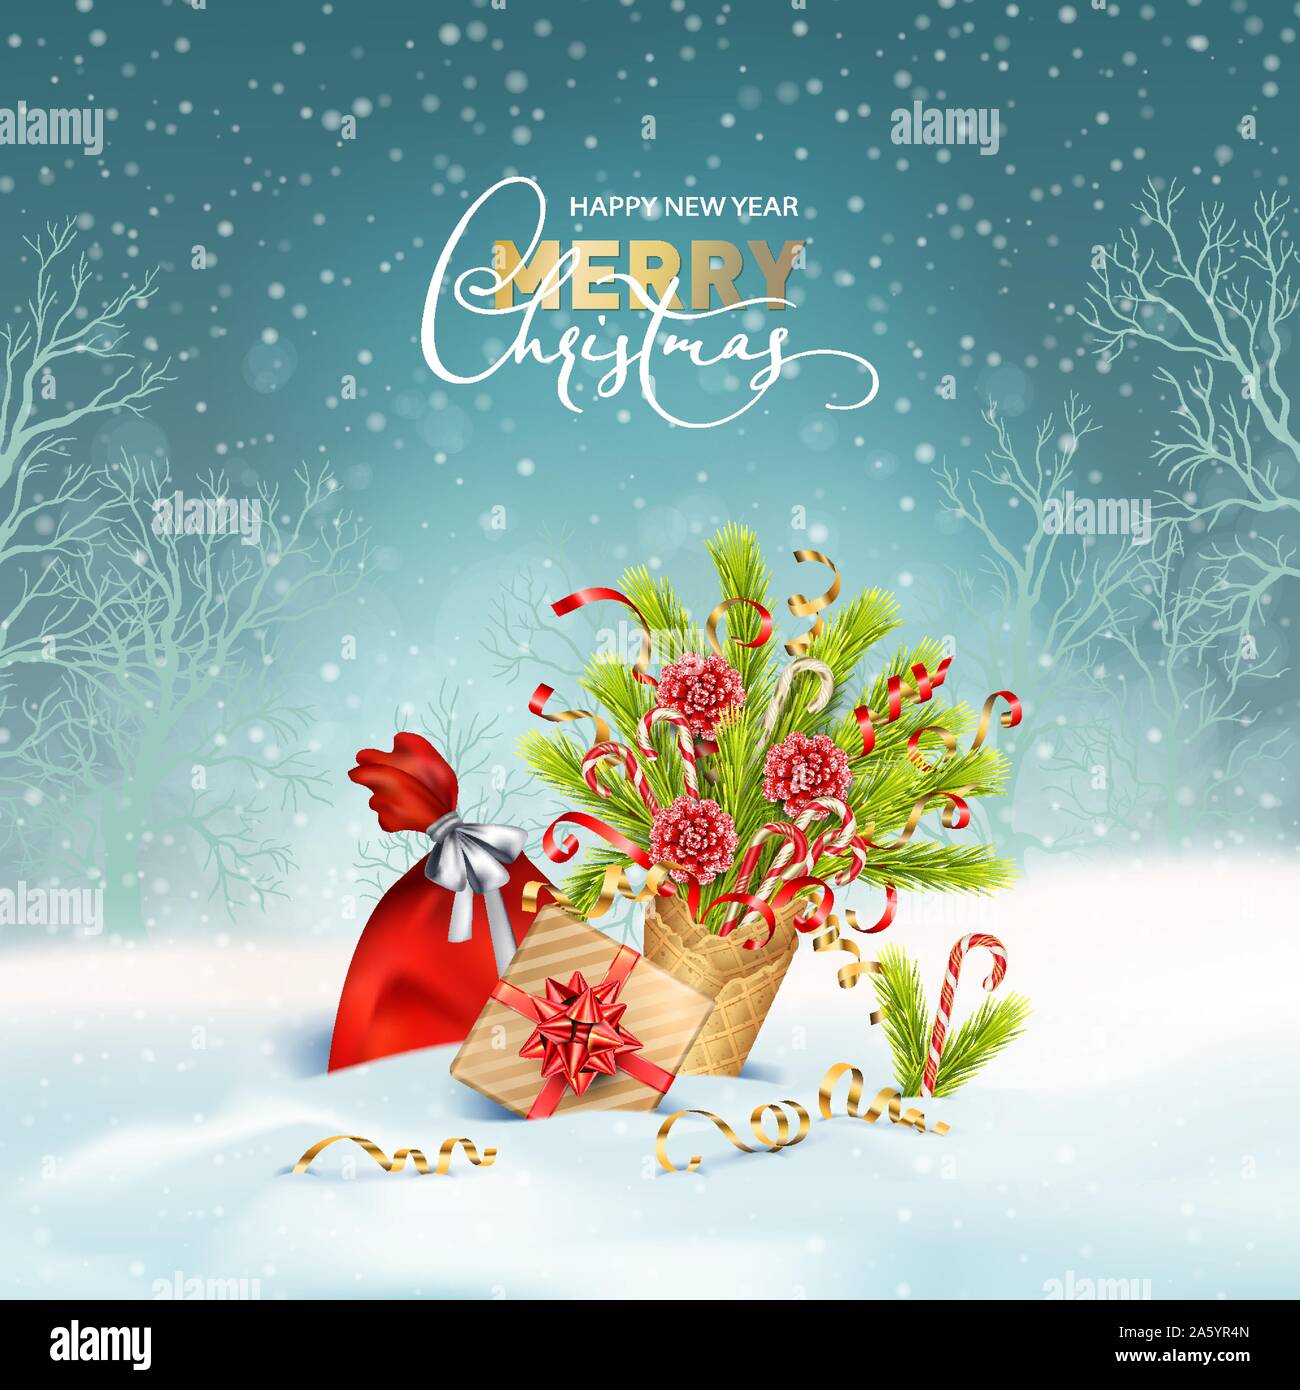 Christmas Holiday Background Stock Vector